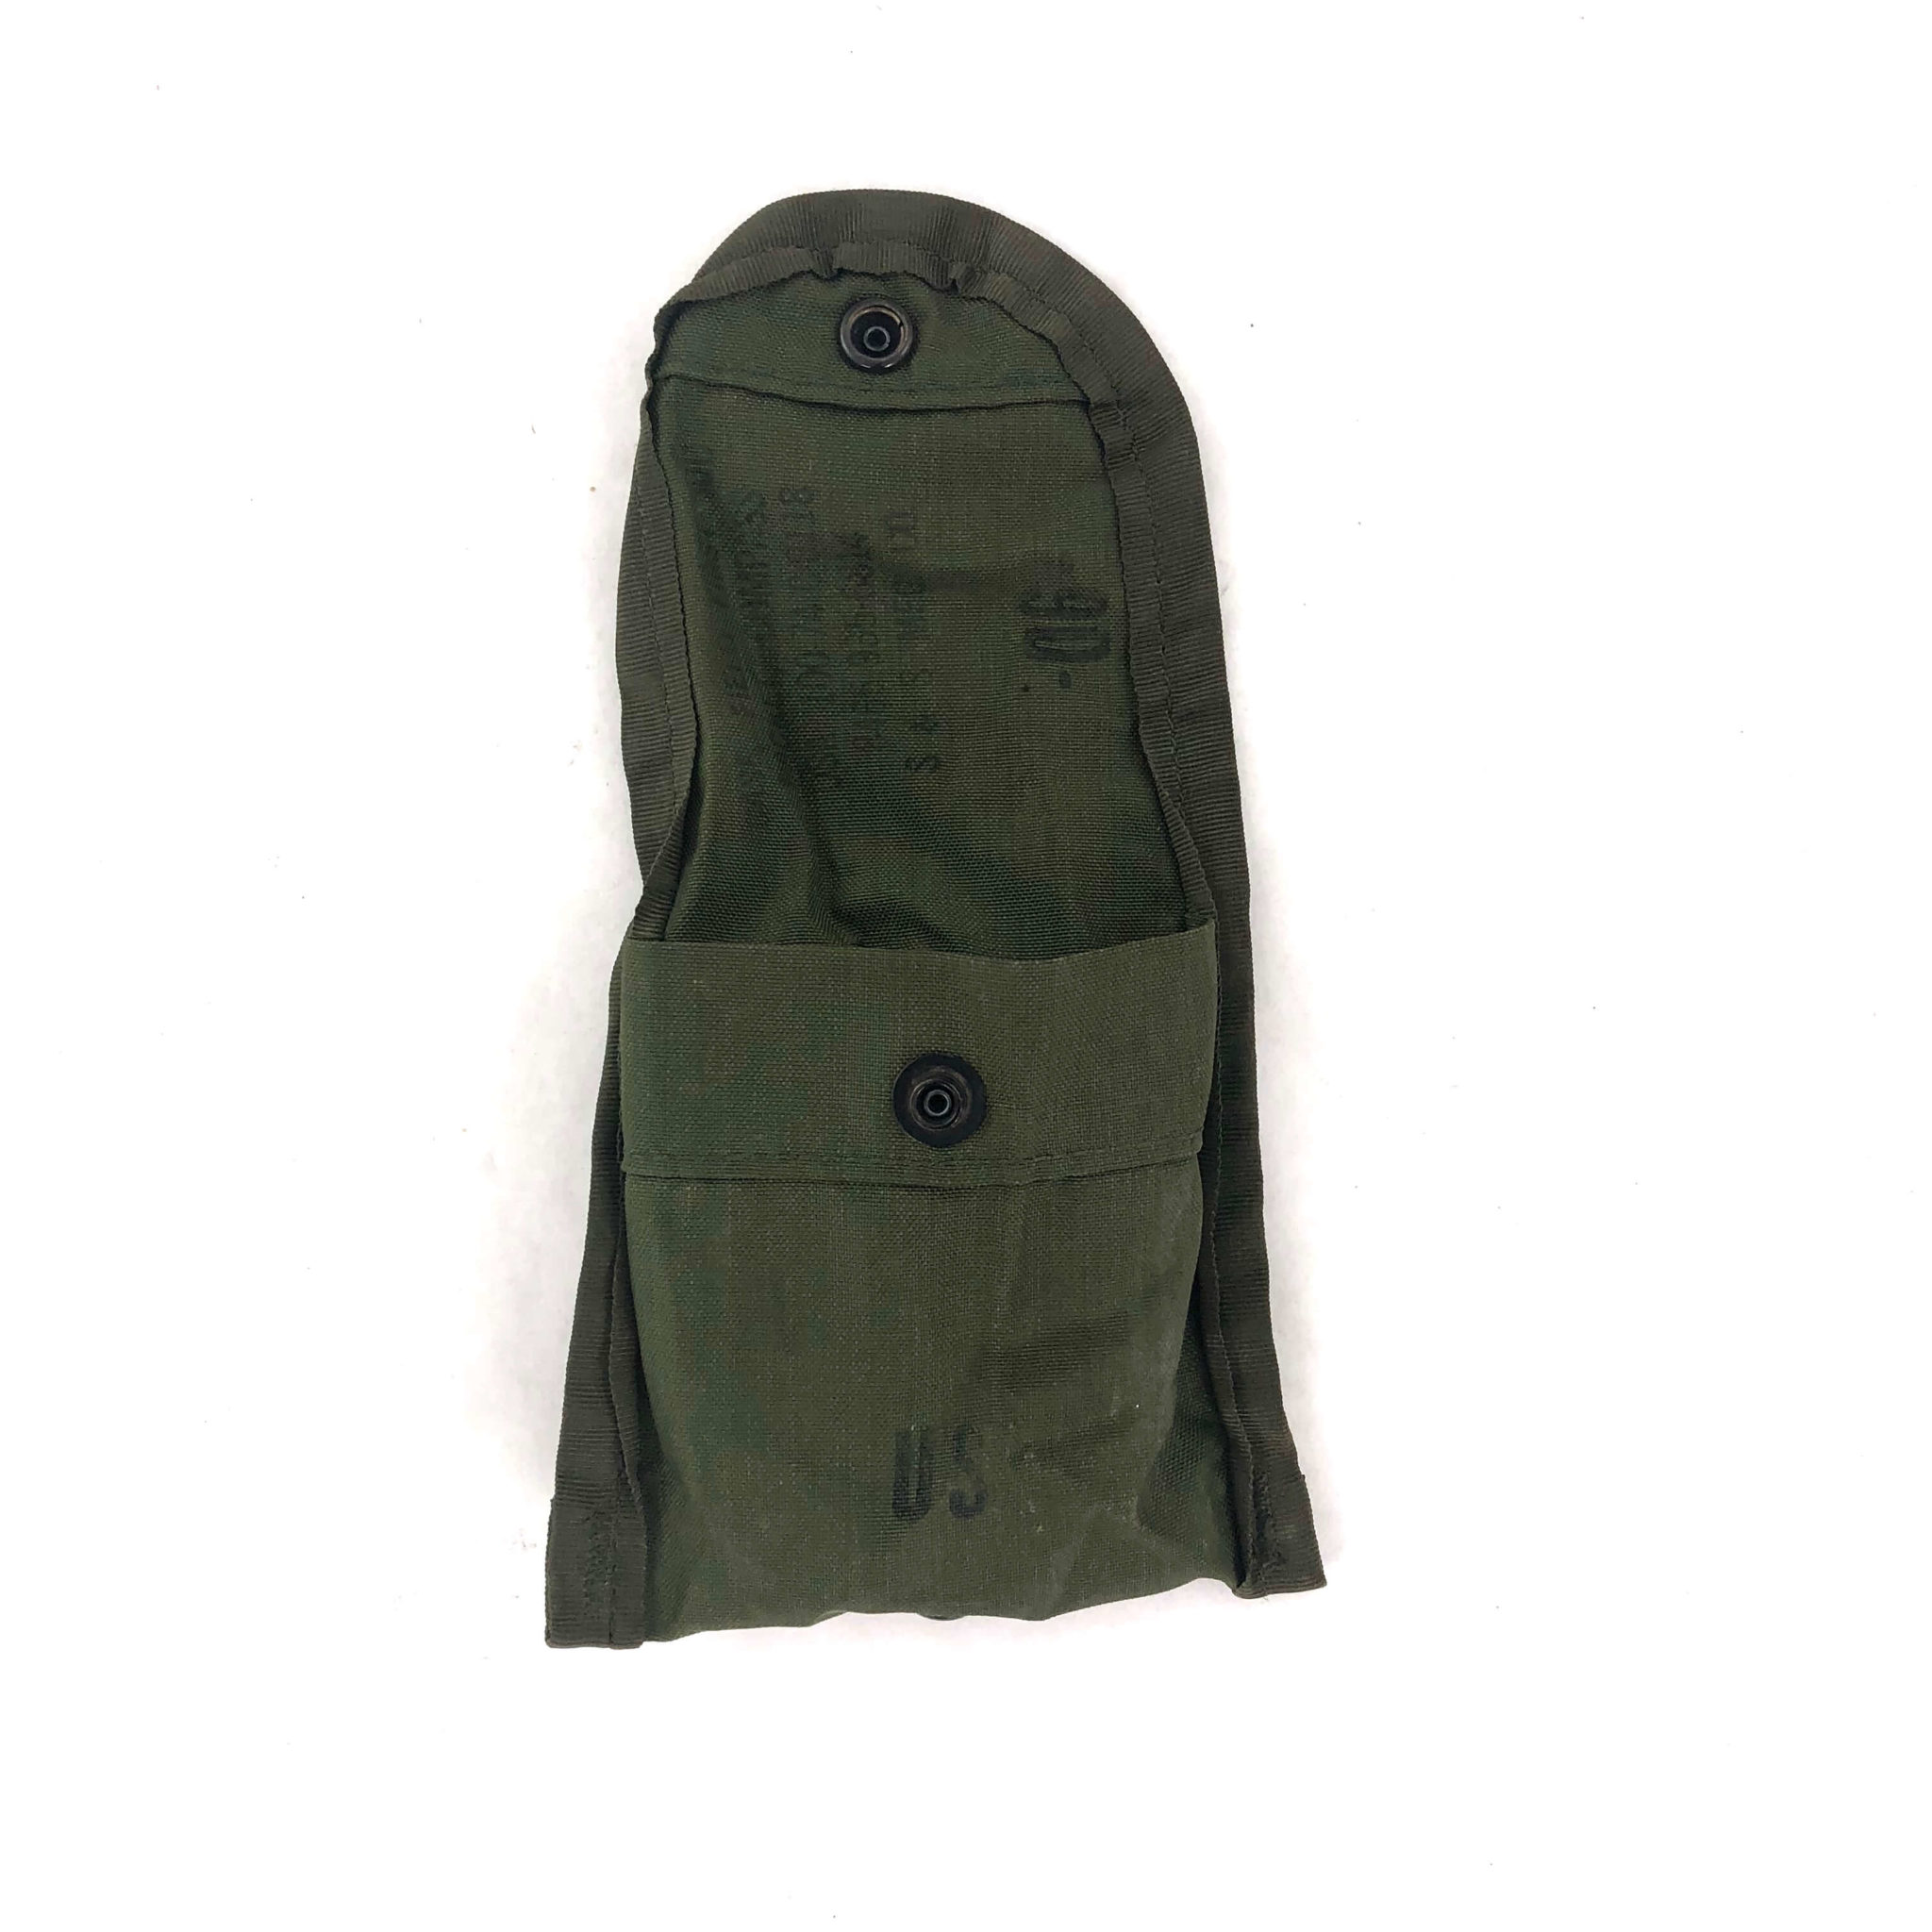 3 US MILITARY USGI ALICE COMPASS POUCH CASE OD GREEN NYLON! COOL! EXC COND! Details about    